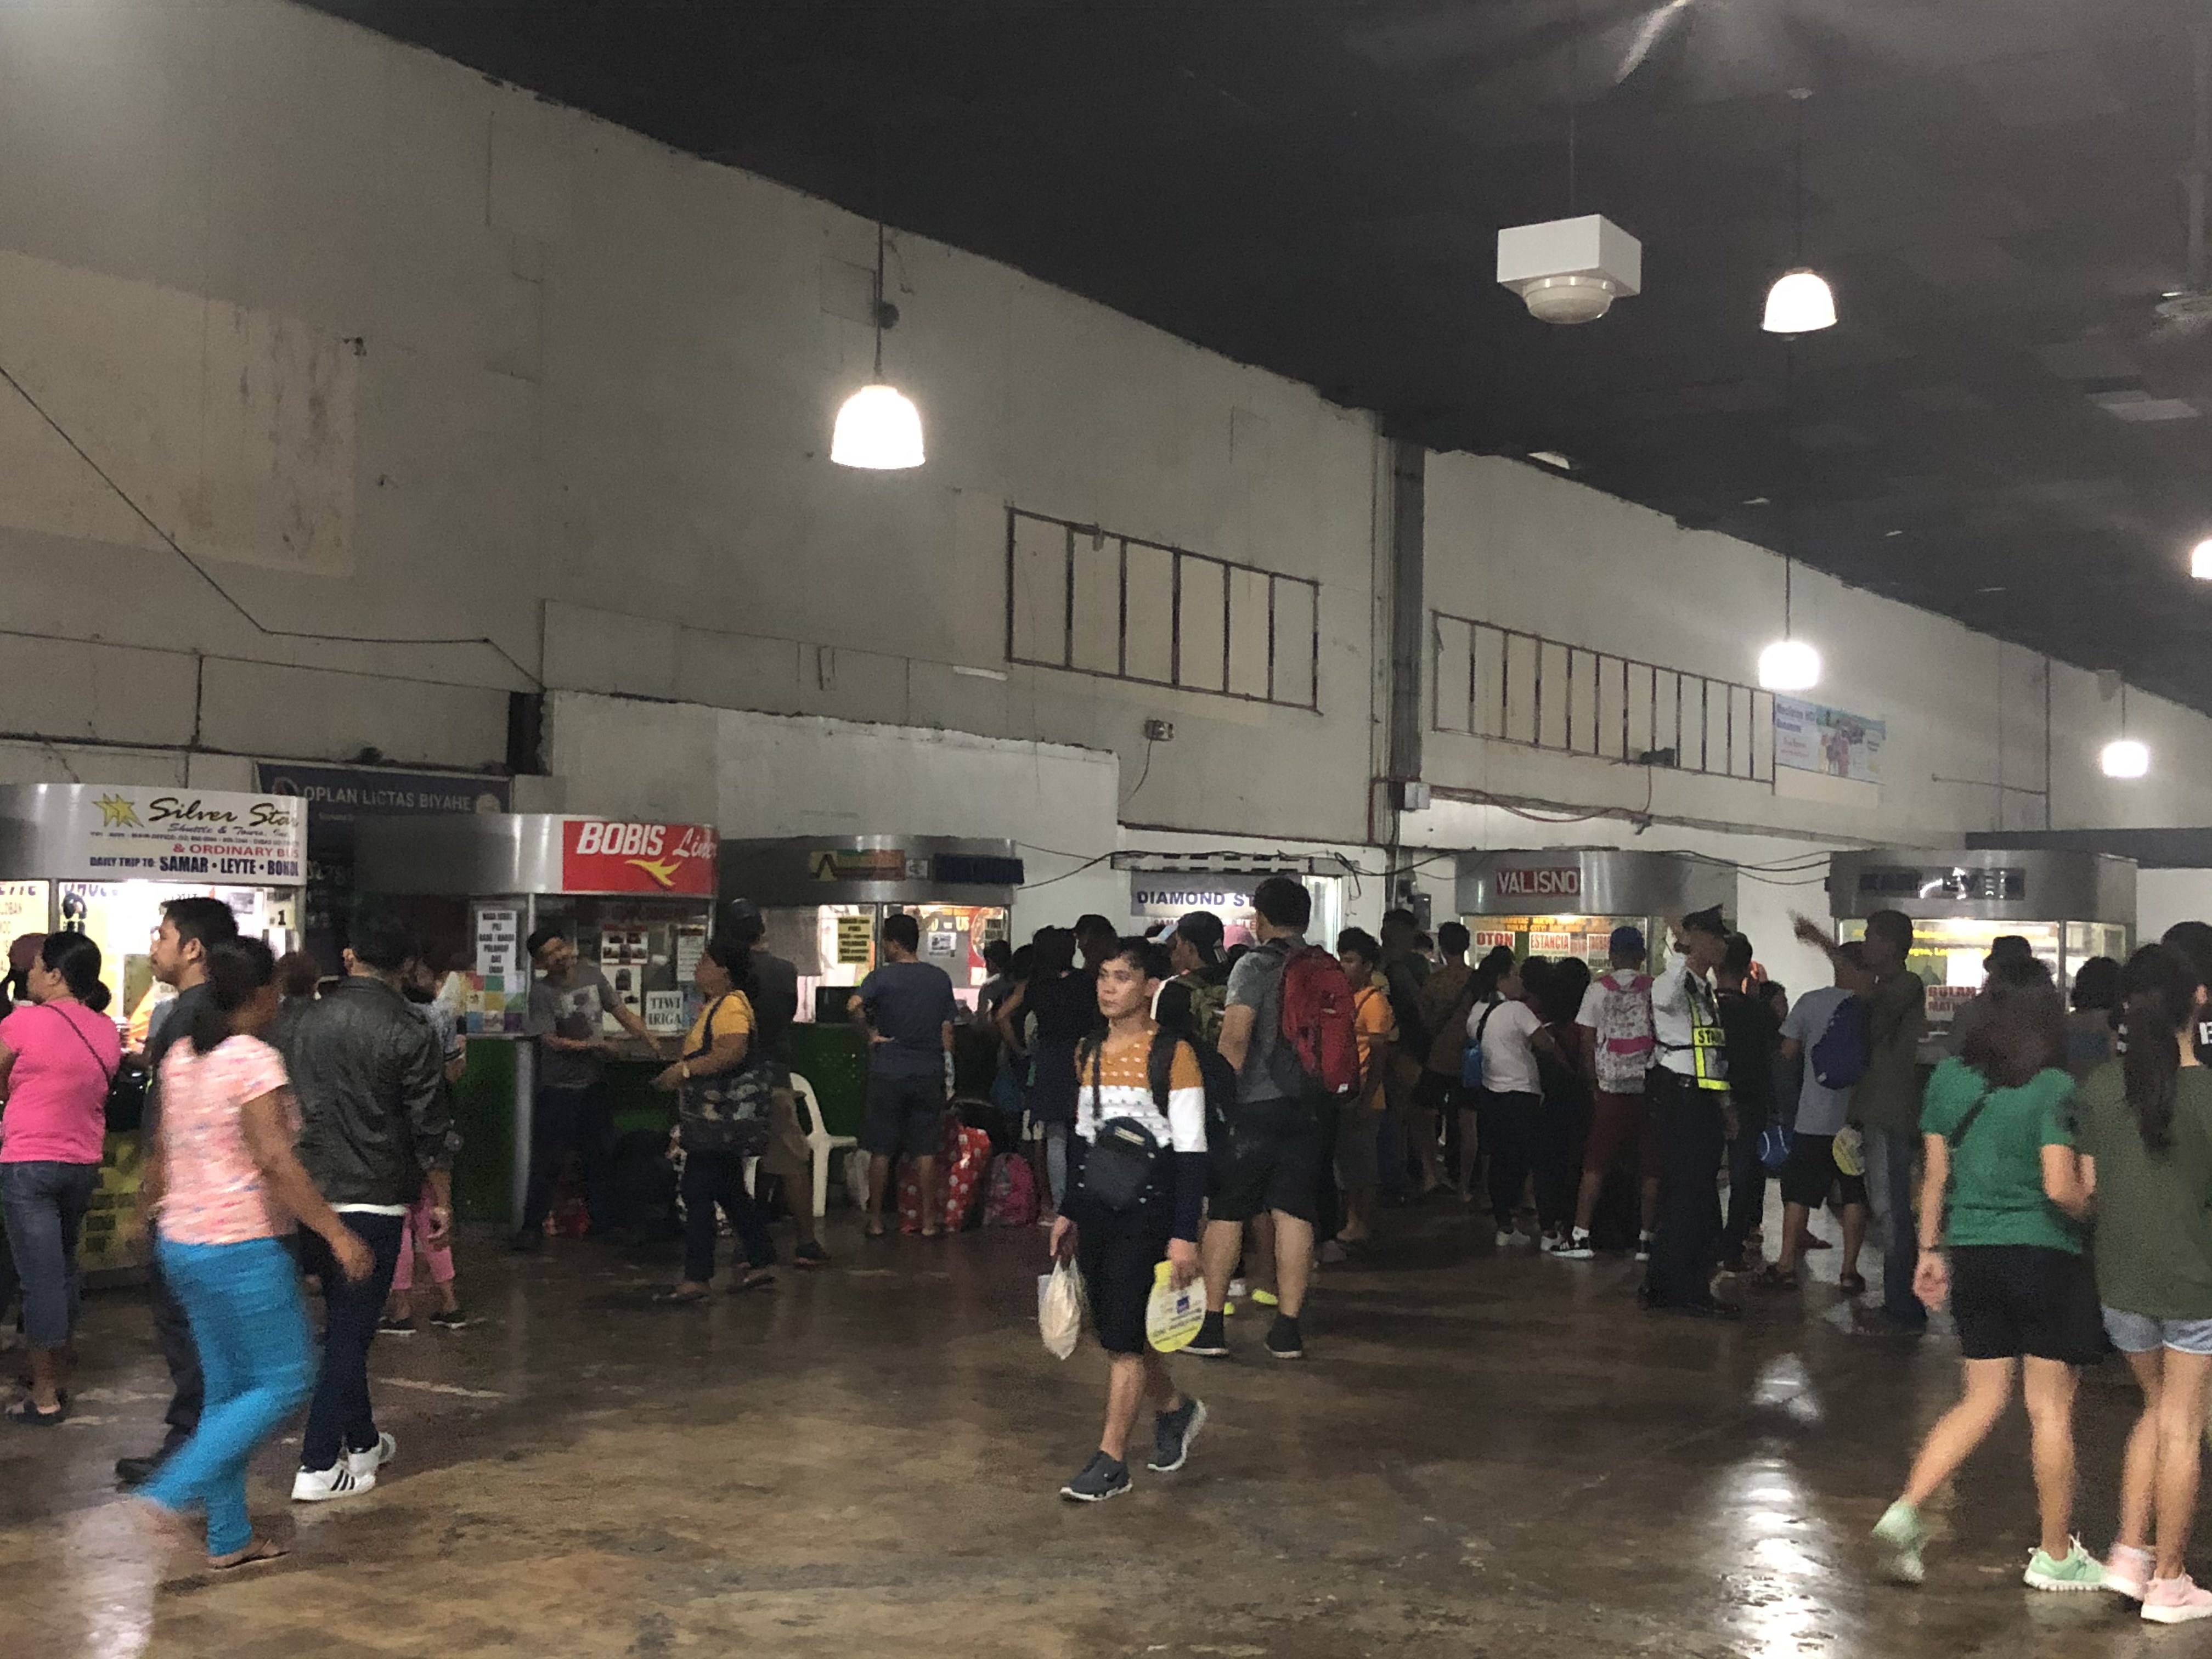 hristmas season travellers flock to the Araneta bus terminal in Cubao, Quezon City on Saturday to book trips to the provinces ahead of Christmas Day.